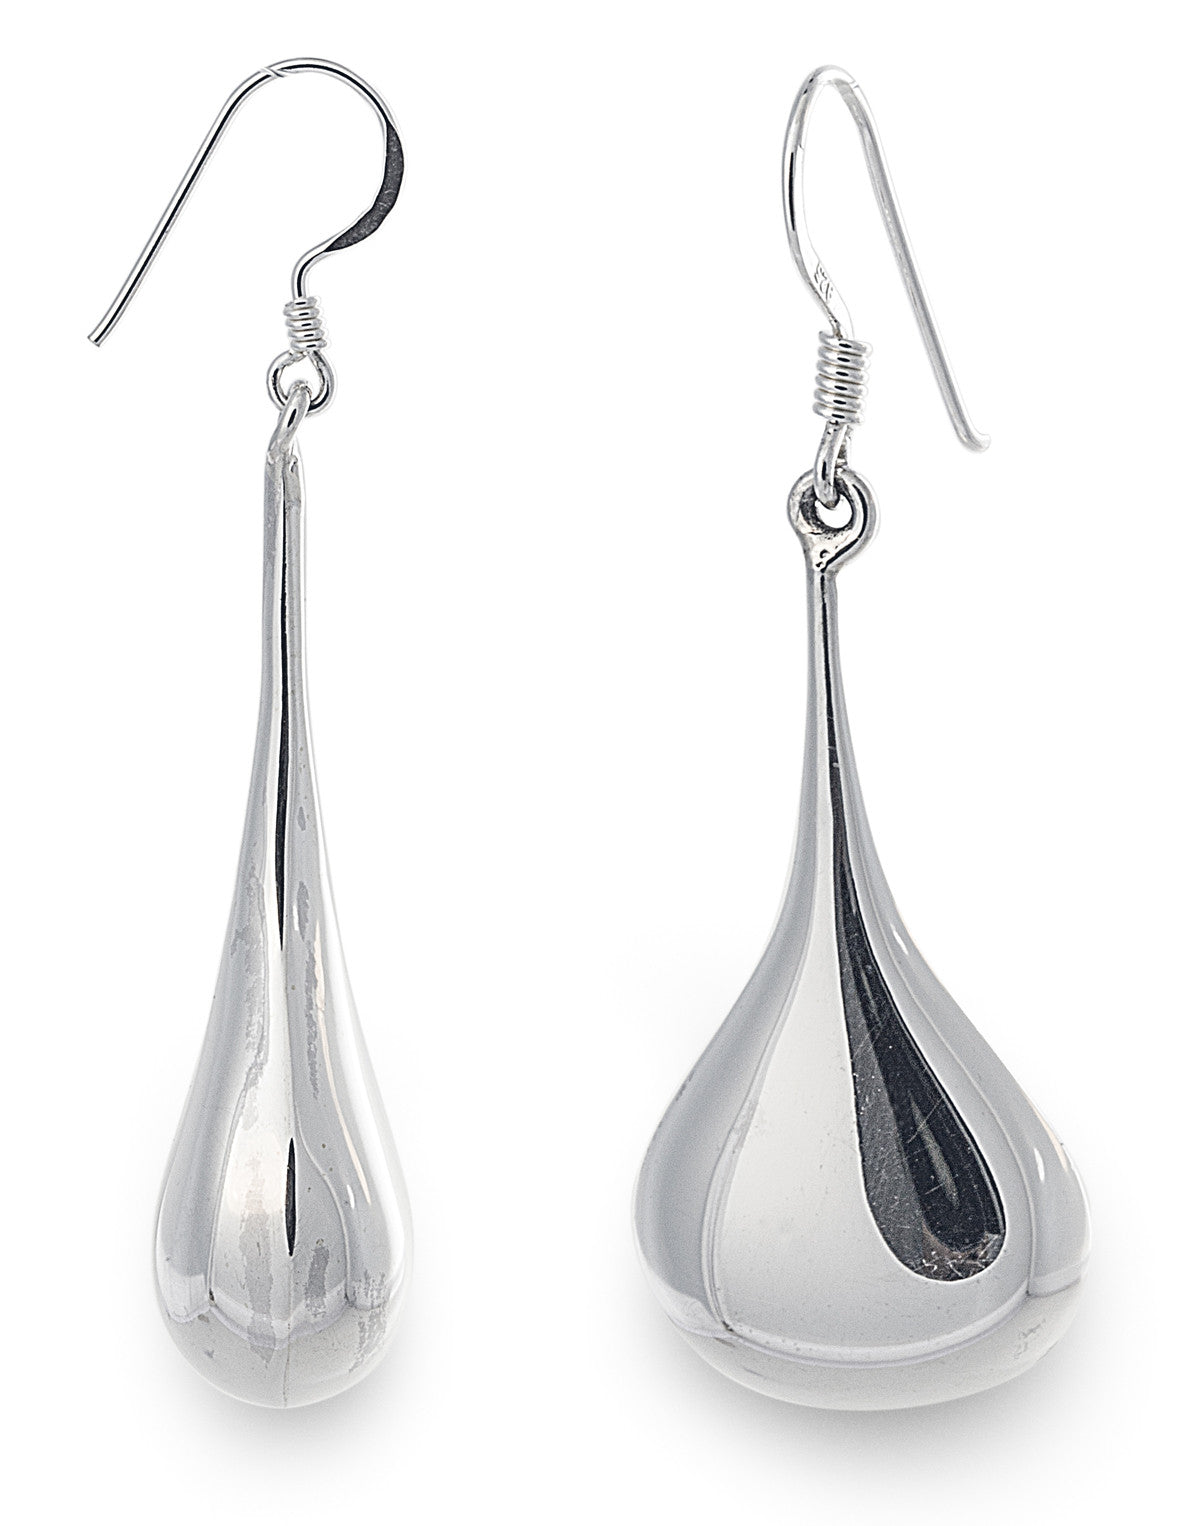 The Tanti Jeannie Earrings are modern French style earrings in 925 sterling silver with a large tear-shaped drop on an ear wire. Jewellery by Bellagio & Co. Worldwide shipping. Premium sterling silver jewellery.